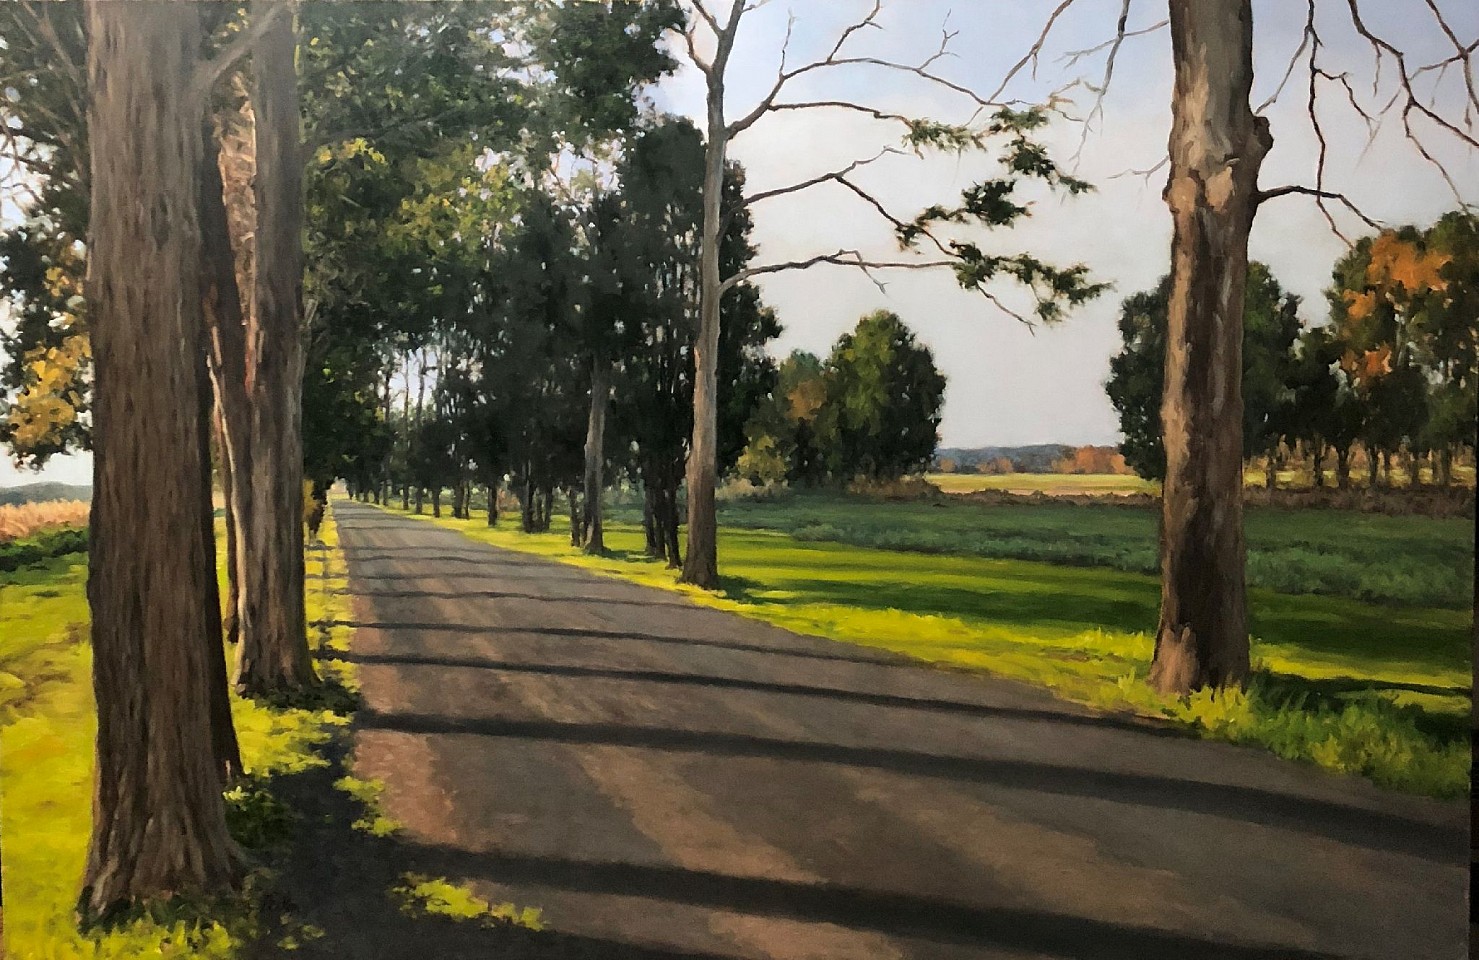 David Peikon, Walking on a Country Road, 2018
oil on linen, 40 x 60 in. (101.6 x 152.4 cm)
DP200108